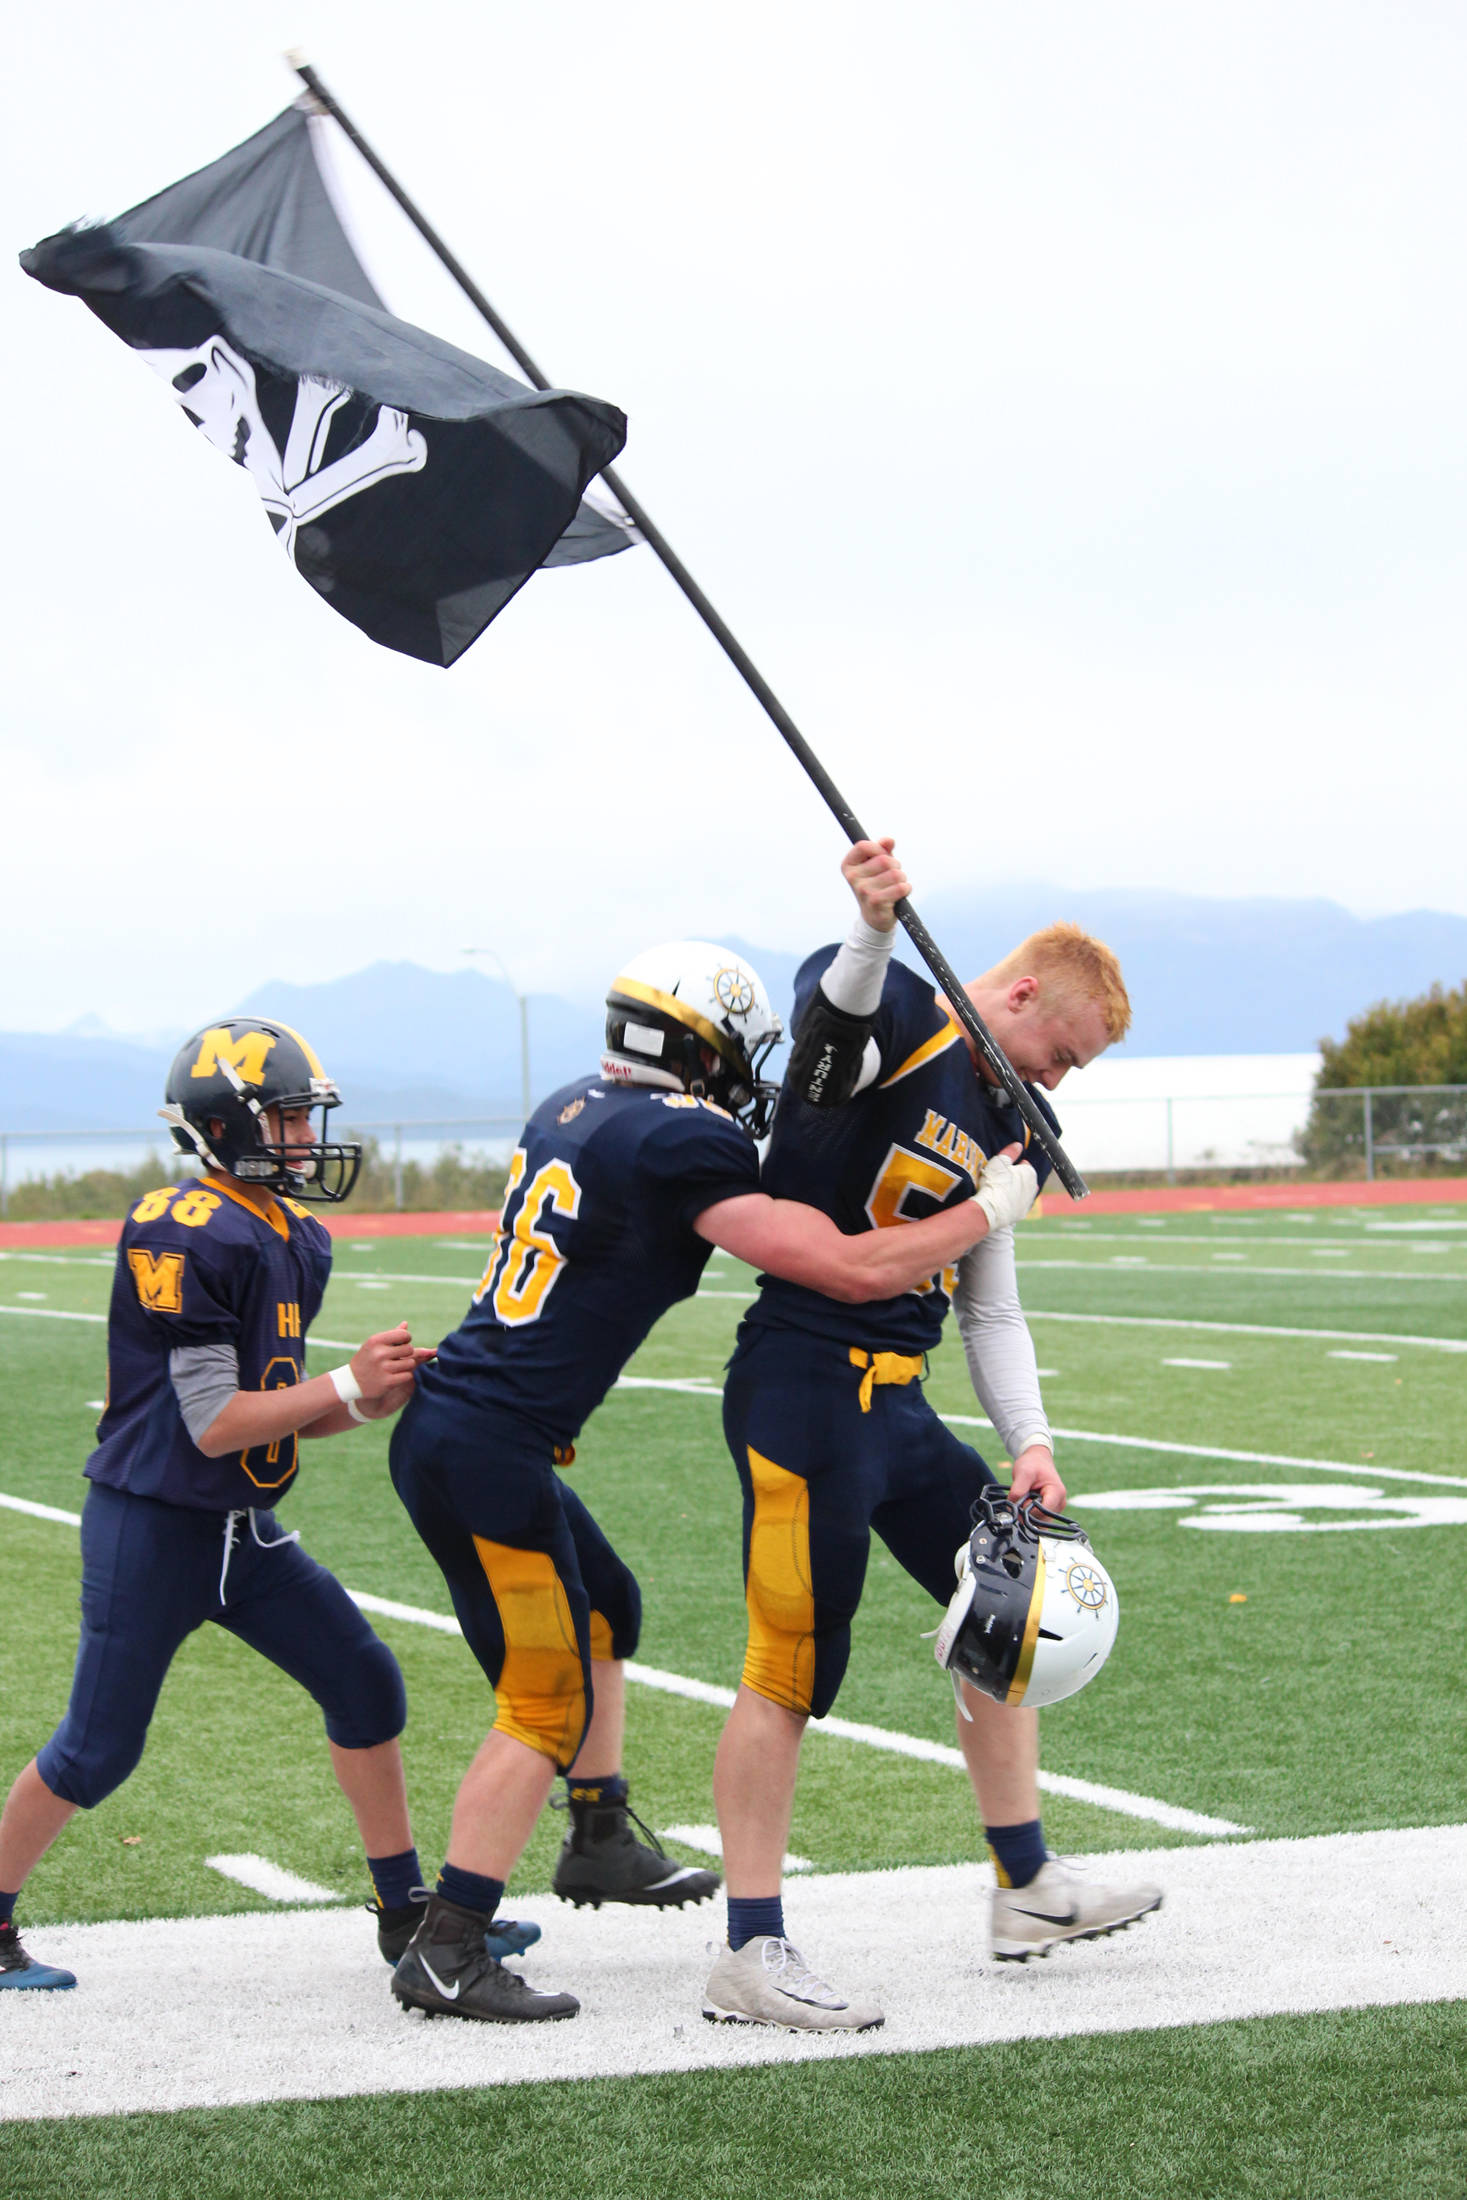 Levi Smith gets a hug from a teammate as he walks of the field at Homer High School carrying a pirate flag Oct. 7, 2017 following the varsity football team’s win over Ben Eielson High School 33-21 in Homer, Alaska. The Mariners went on to lose the ASAA First National Bowl Series Division III Championship game to the Barrow Whalers. (Photo by Megan Pacer/Homer News)